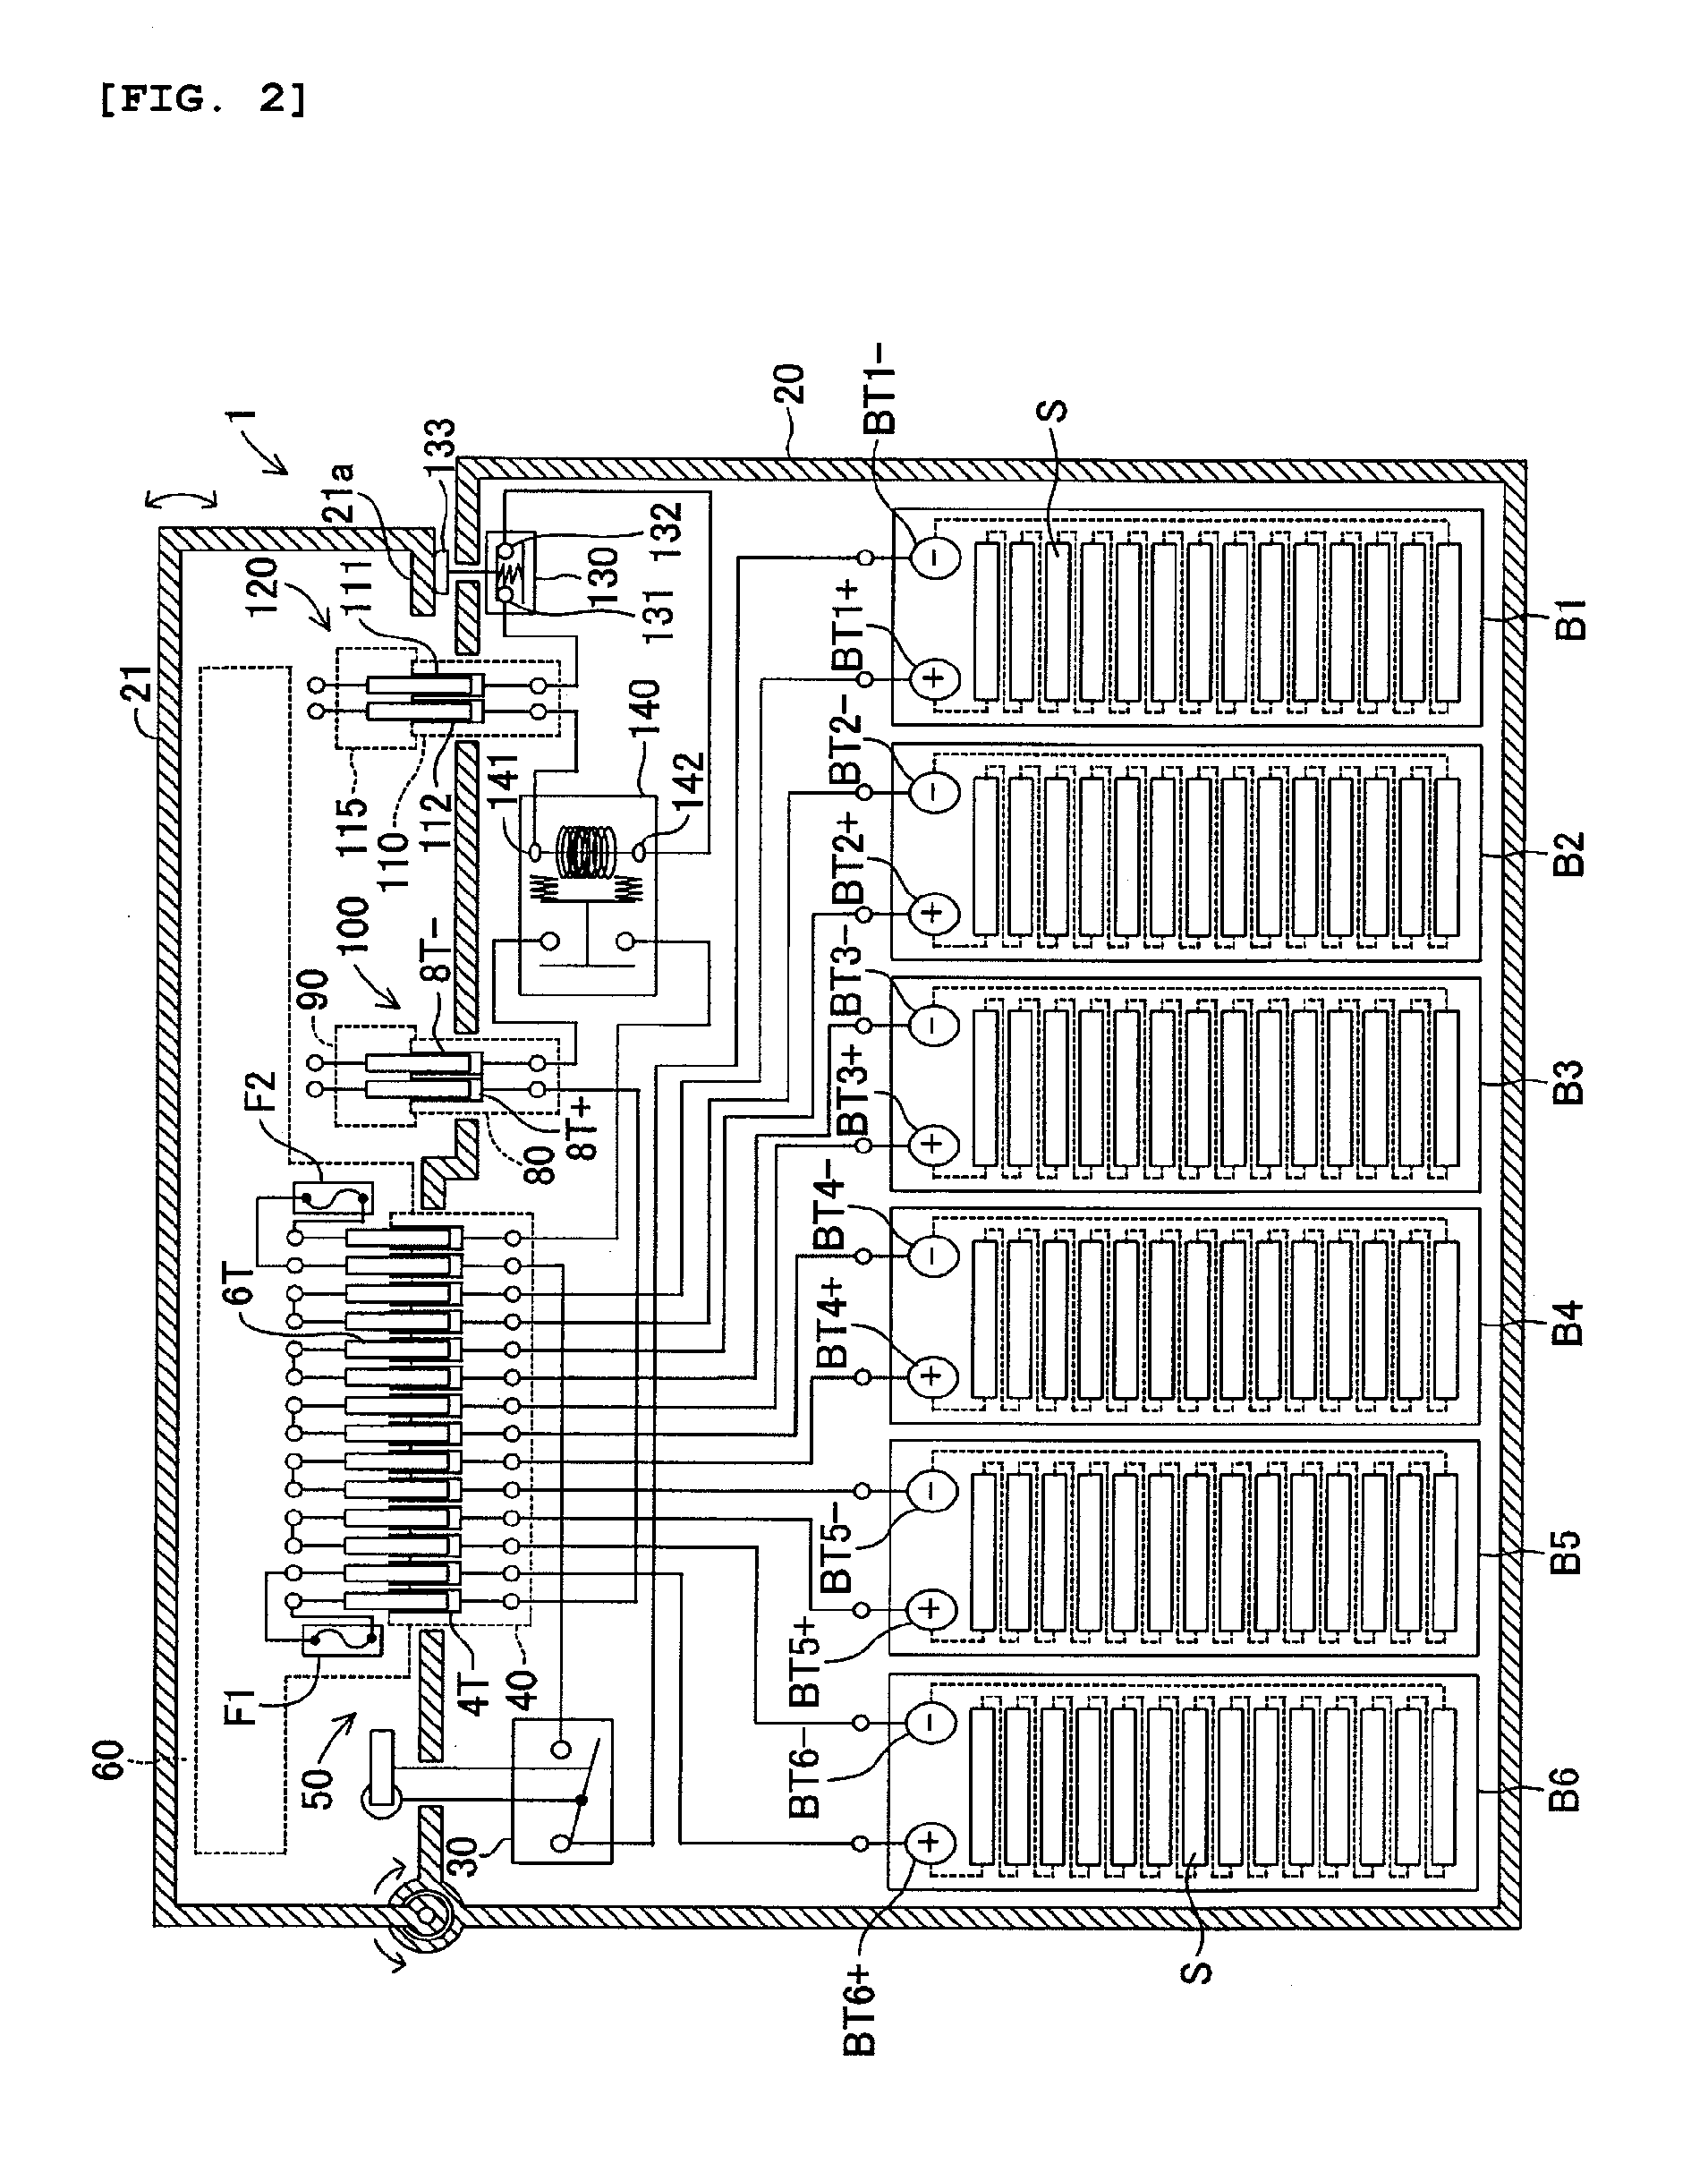 Power supply device for a vehicle